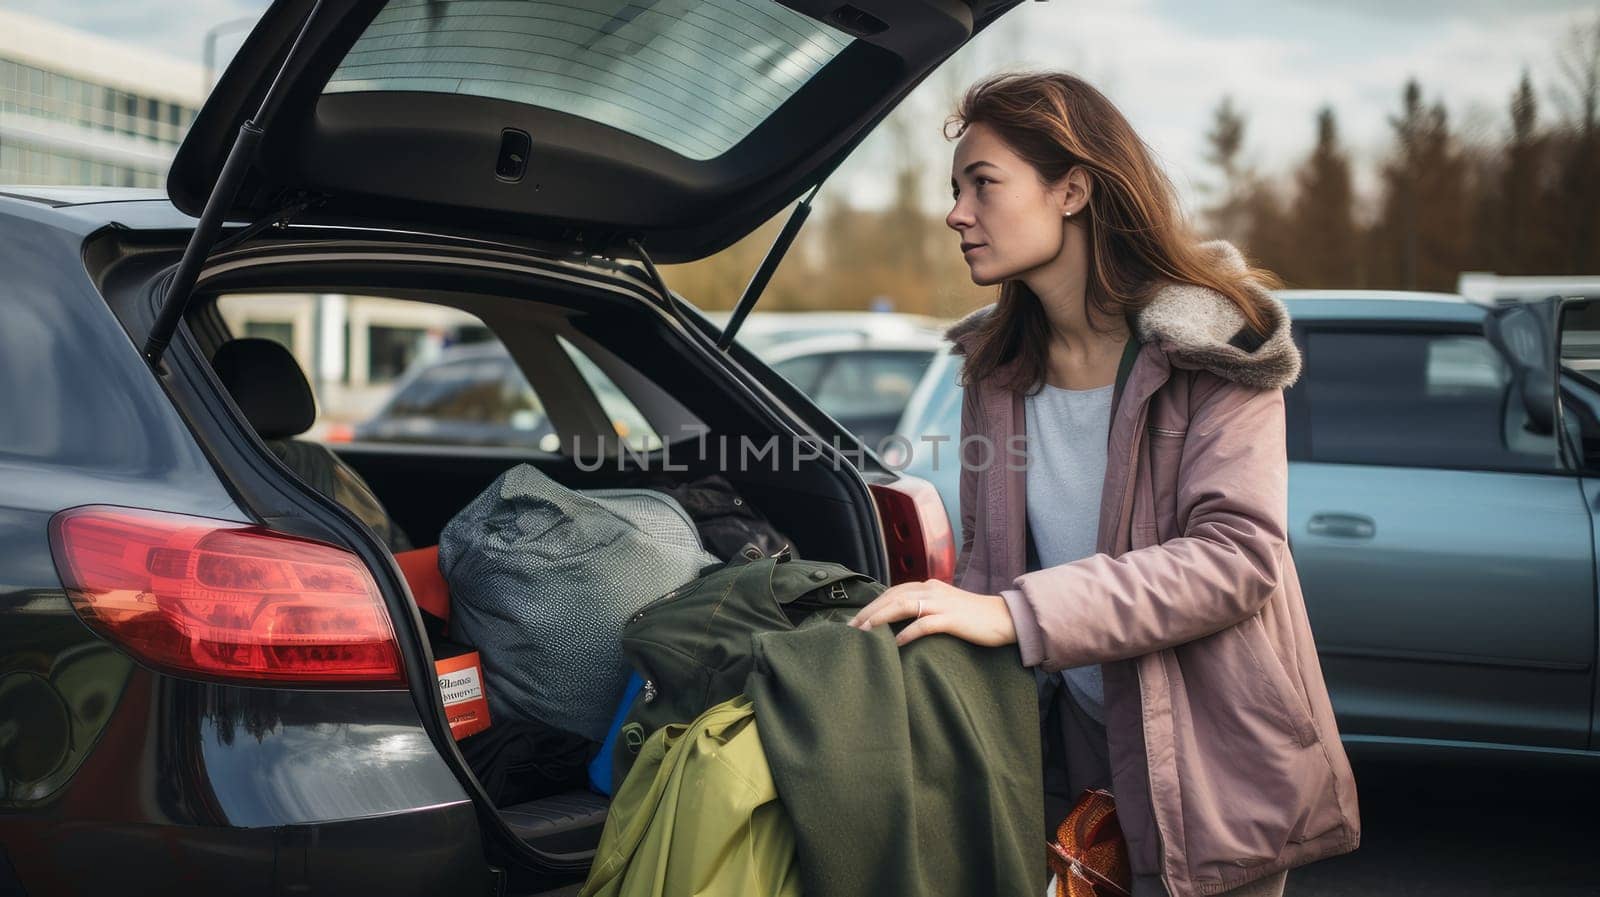 A black woman places, a large amount of shopping in the trunk of her car in a shopping center parking lot on Black Friday sales day